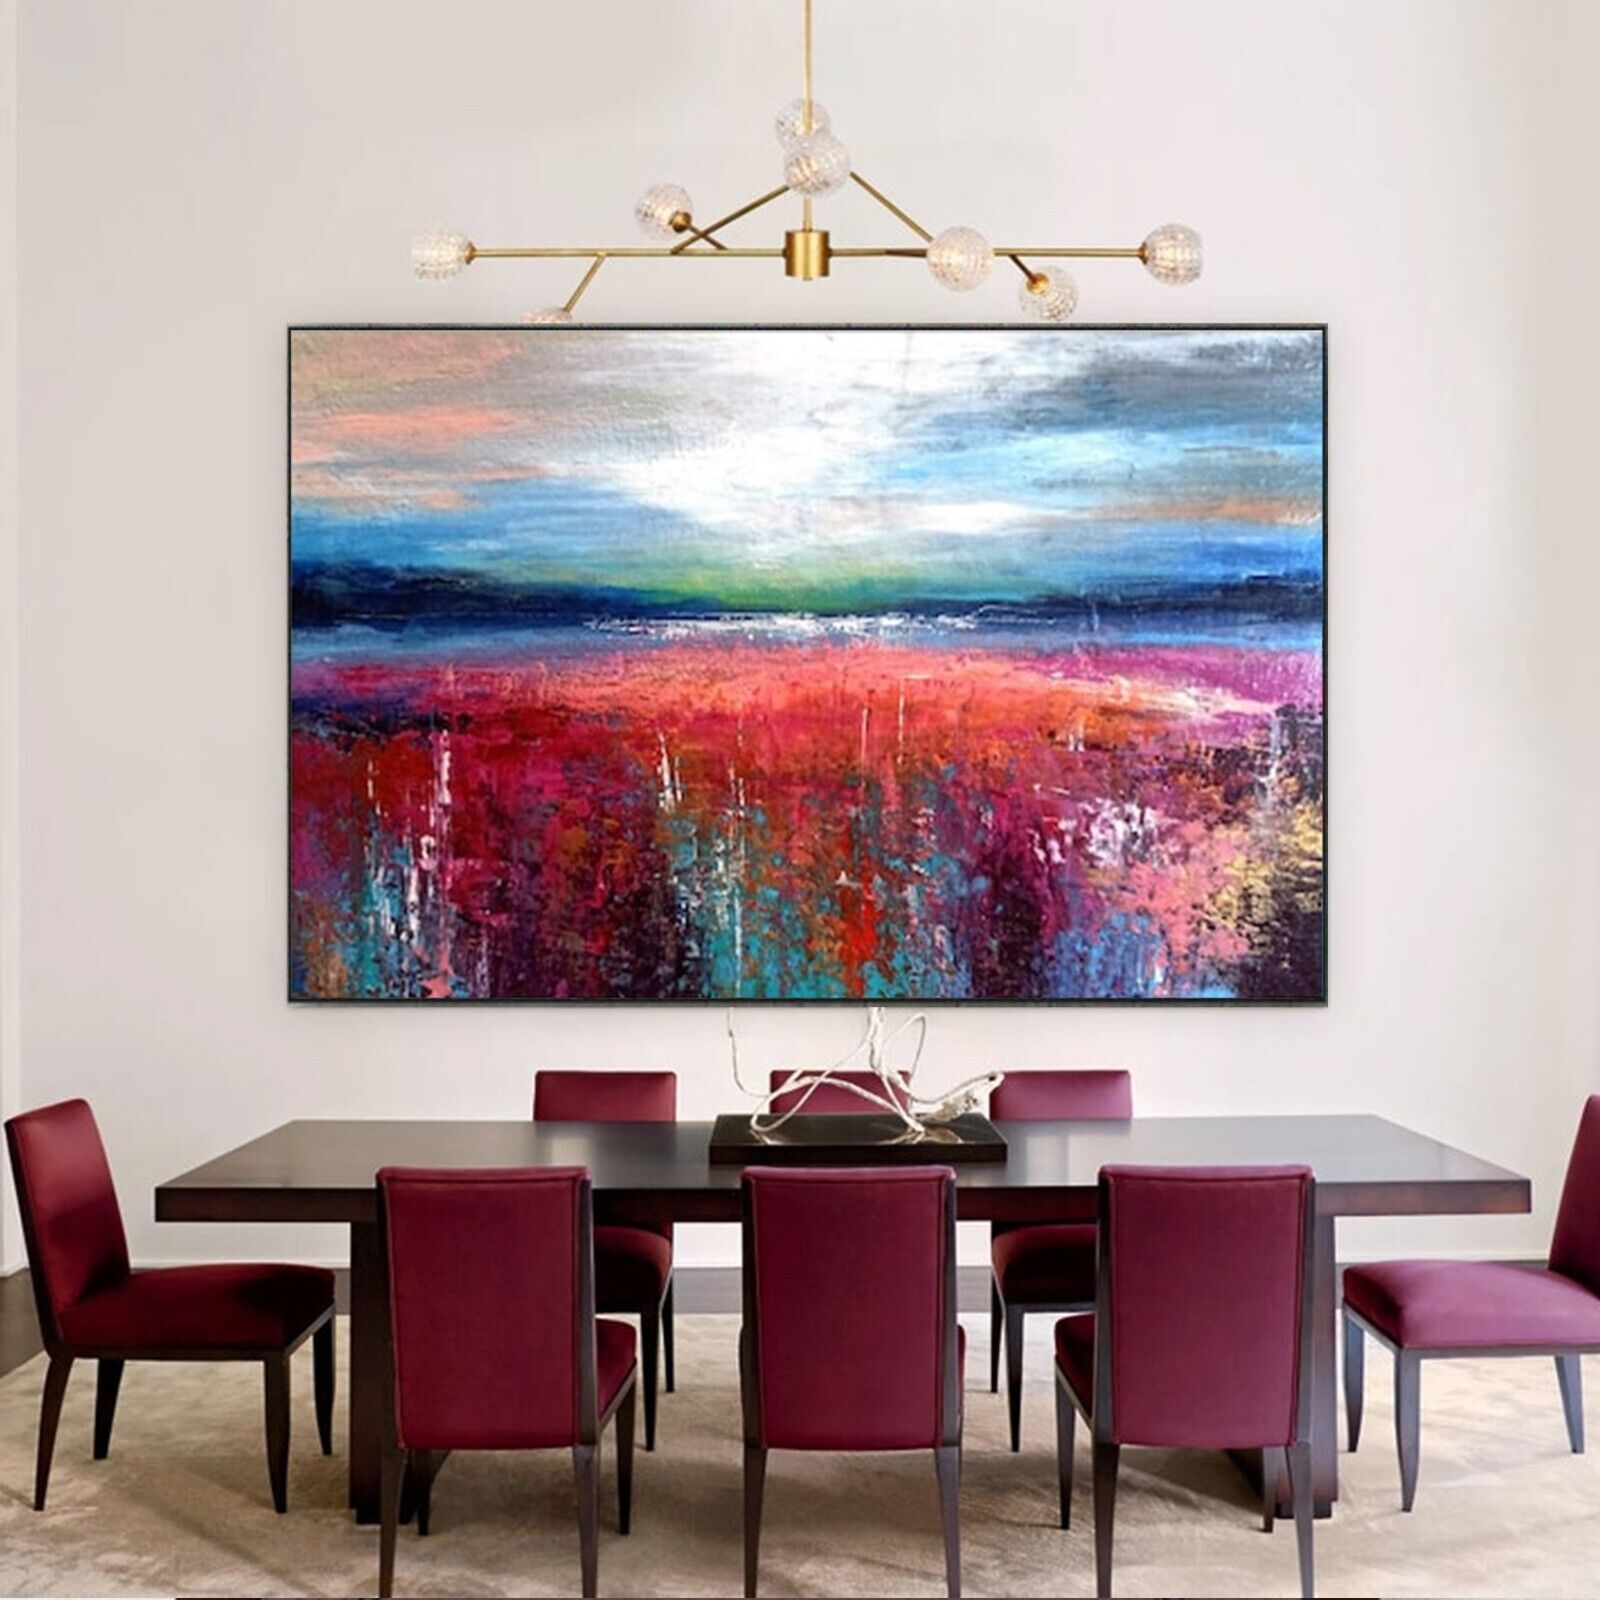 Sale Abstract Multi-Colors Blue Red Waterfall 60H X 48W Painting $2,495 Now $995